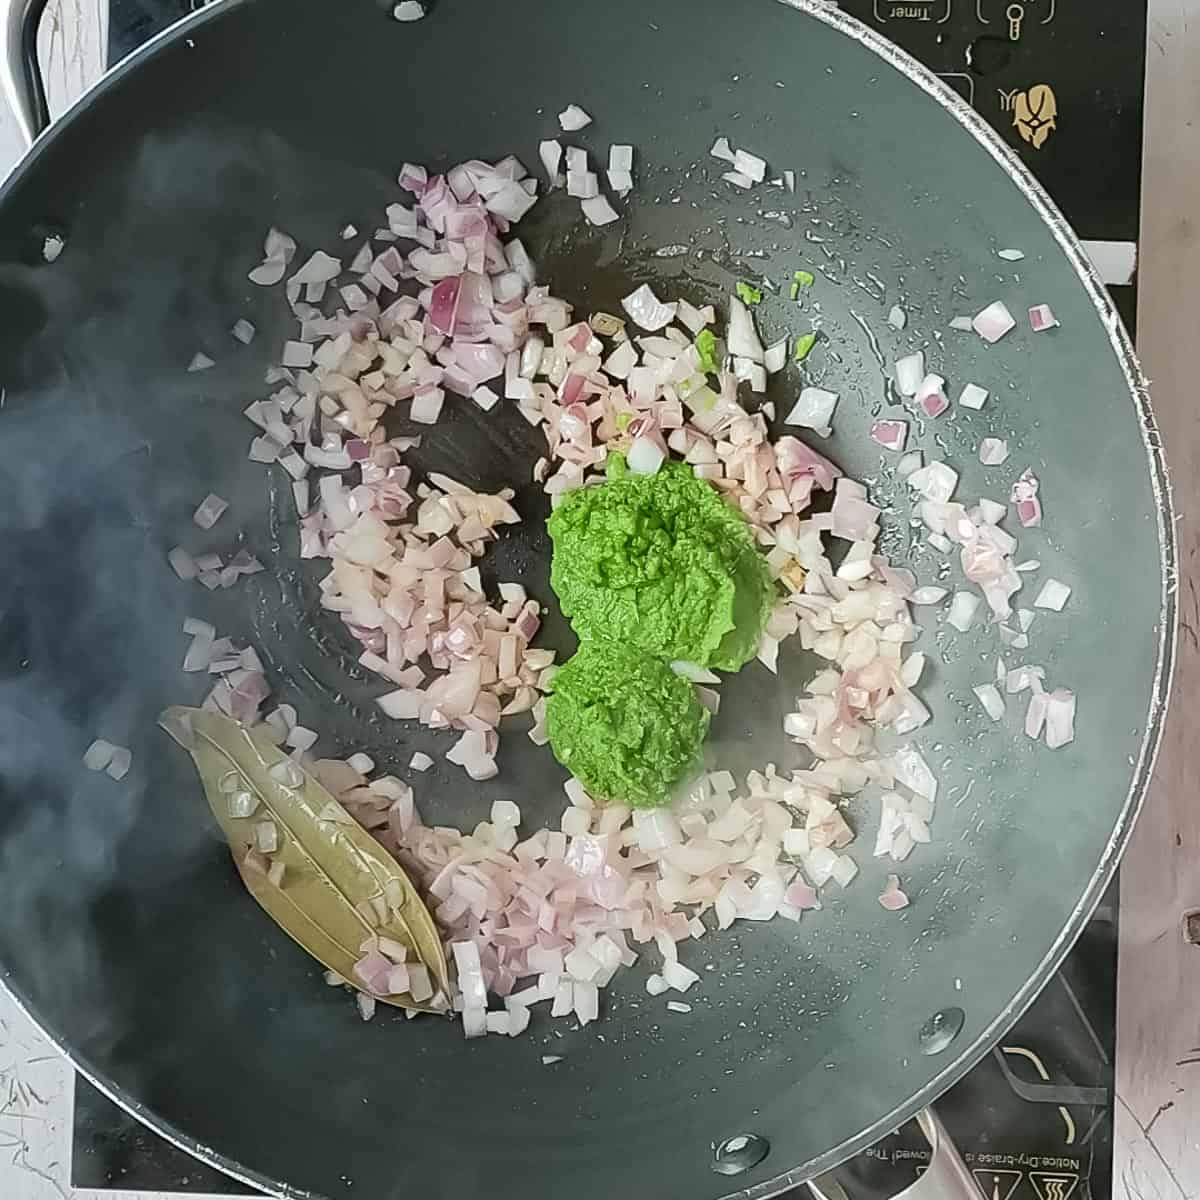 Green paste being added to sauteed onions in a non-stick pan.